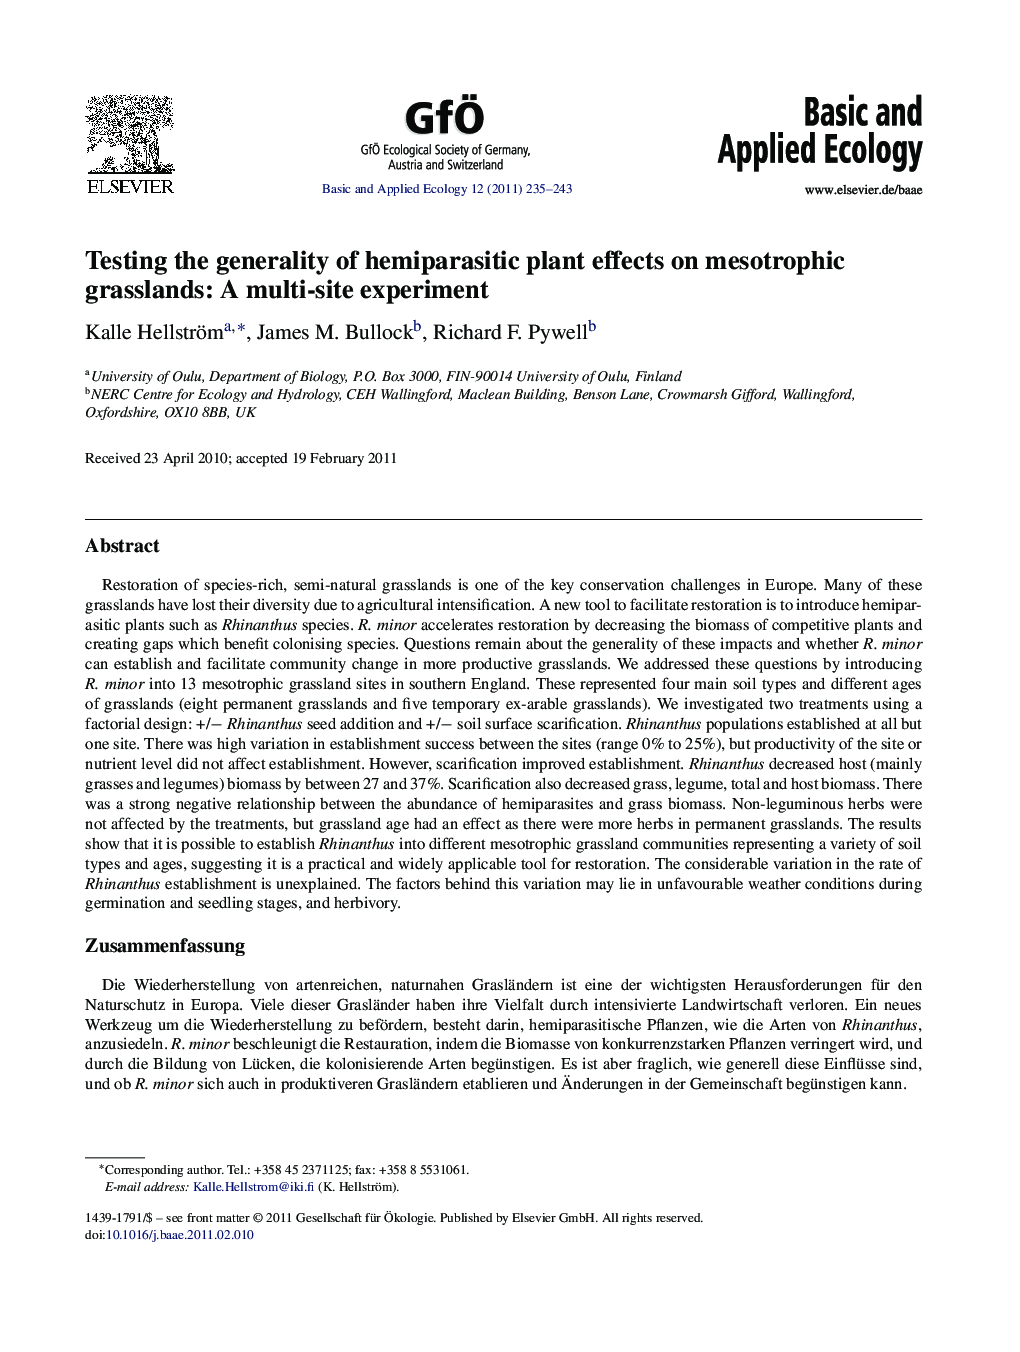 Testing the generality of hemiparasitic plant effects on mesotrophic grasslands: A multi-site experiment